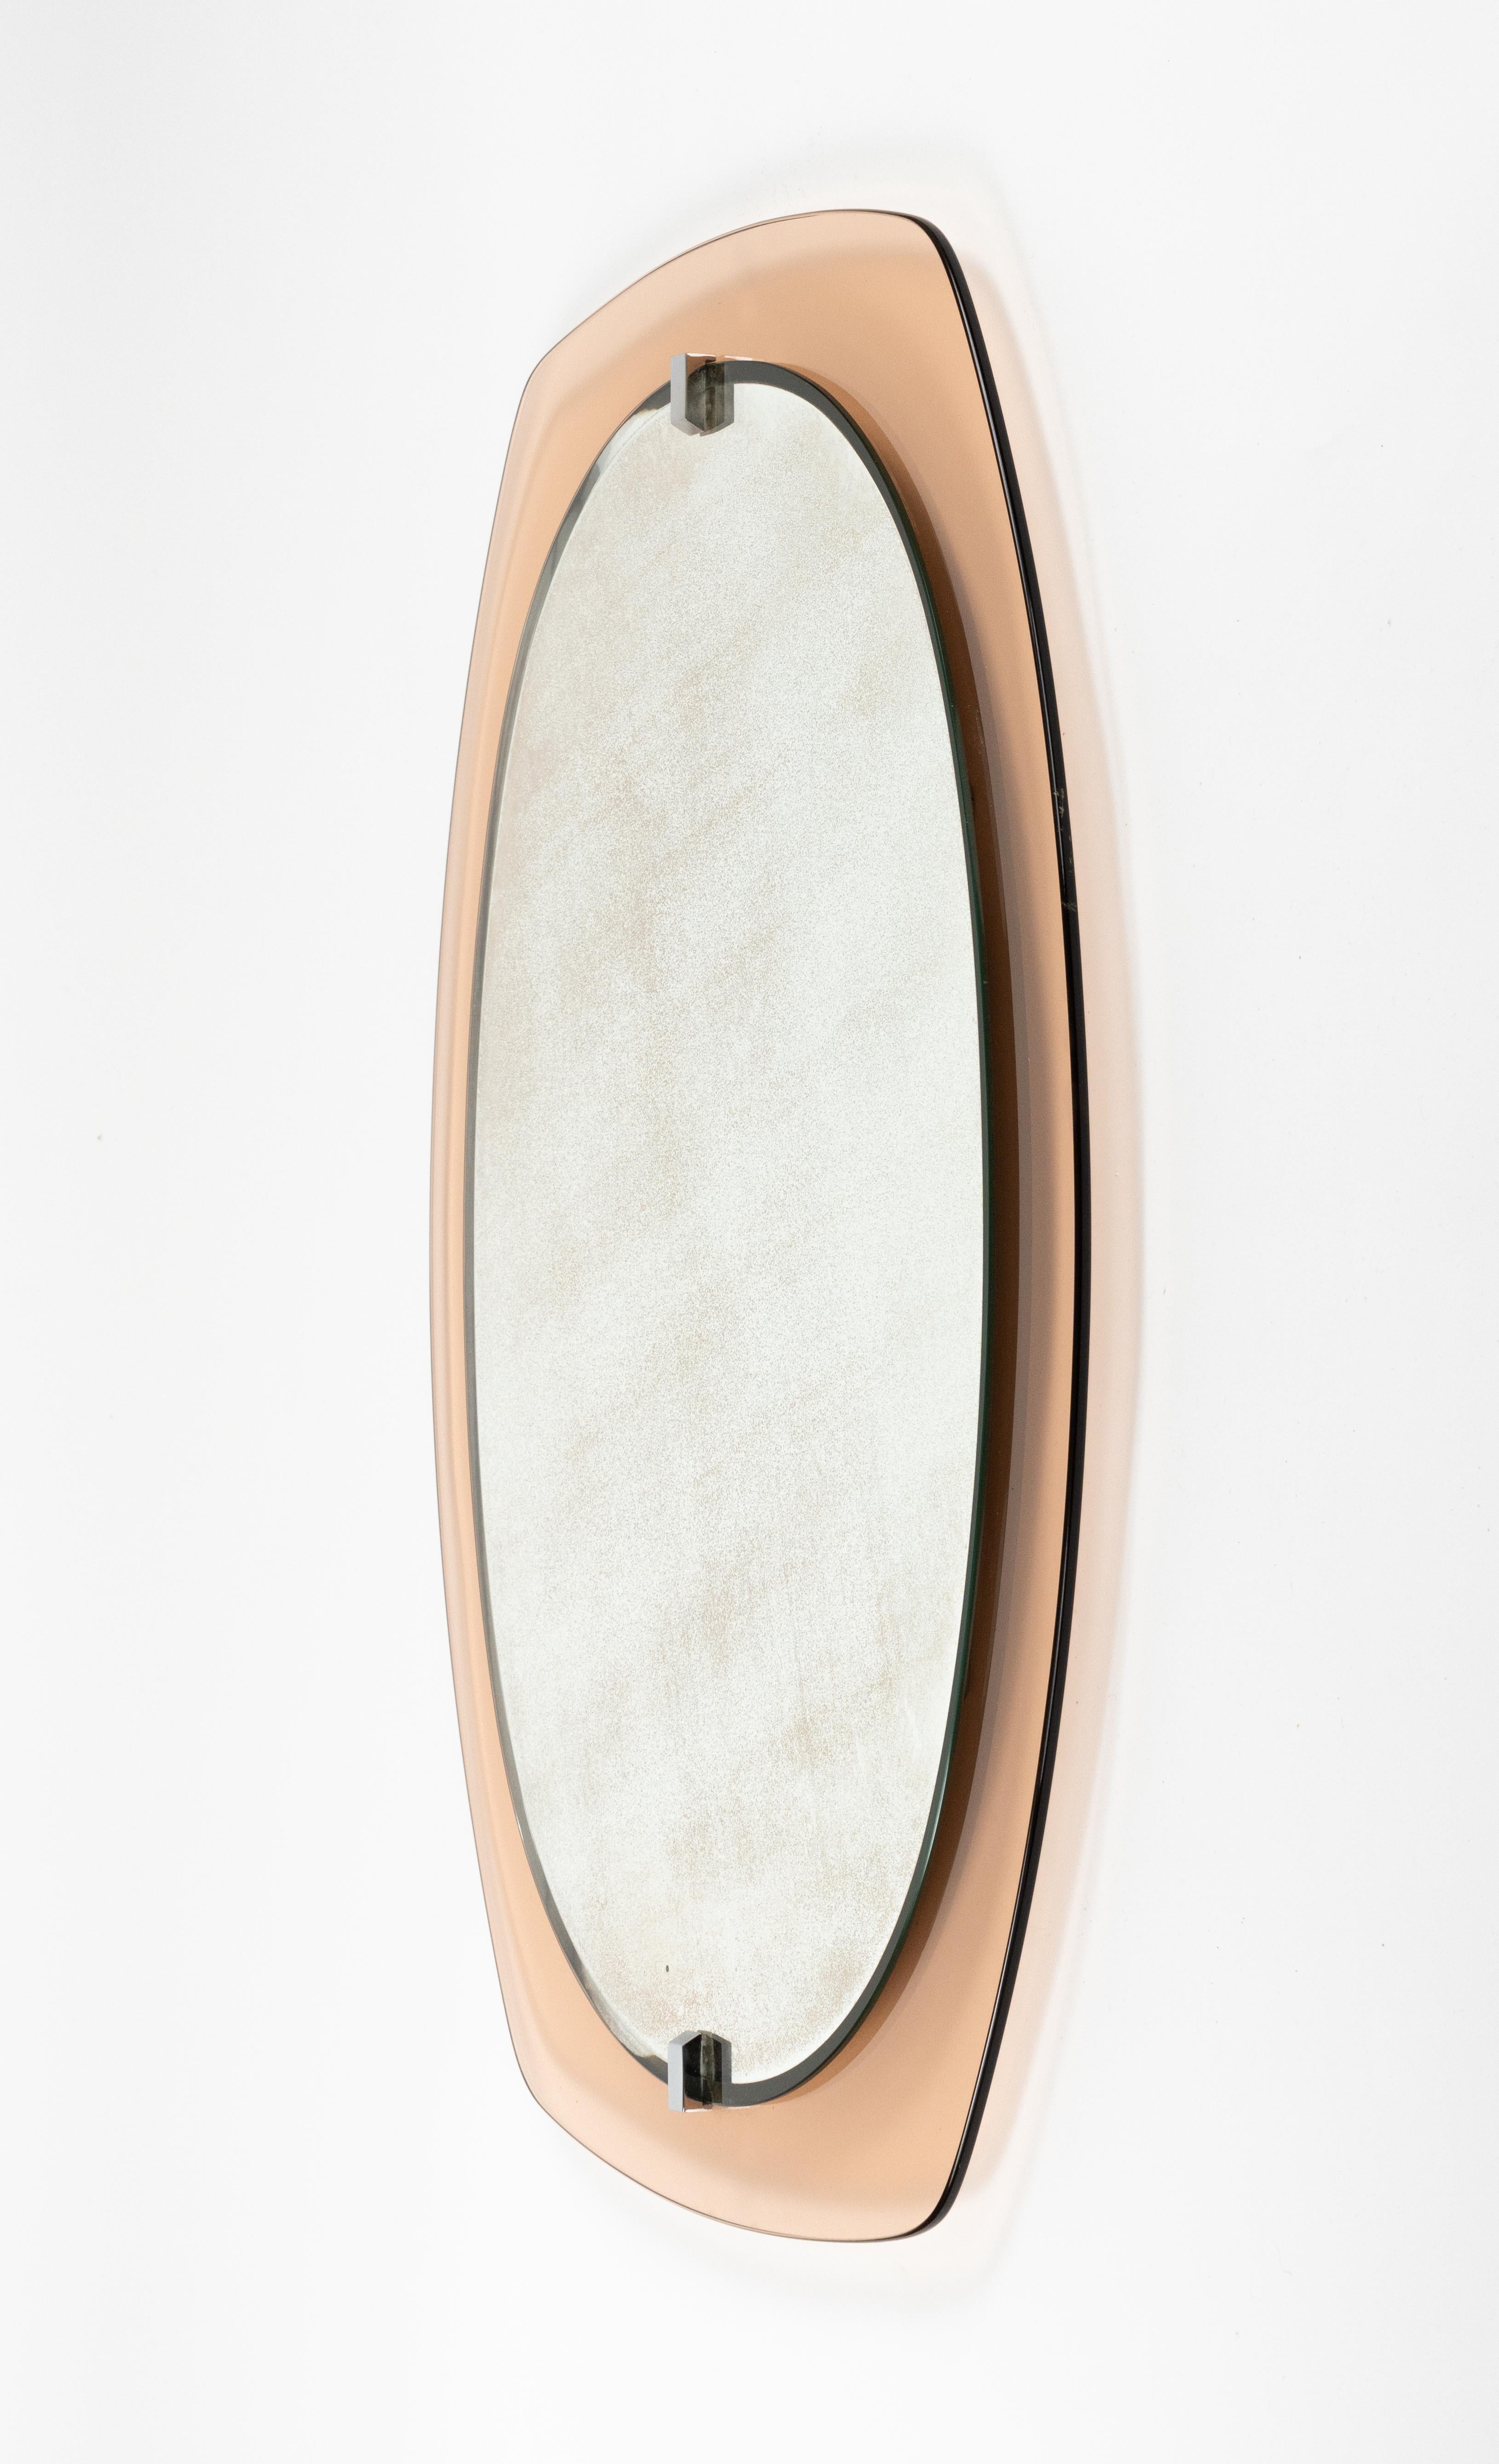 Midcentury Glass Pink Oval Wall Mirror by Veca, Italy 1970s For Sale 6